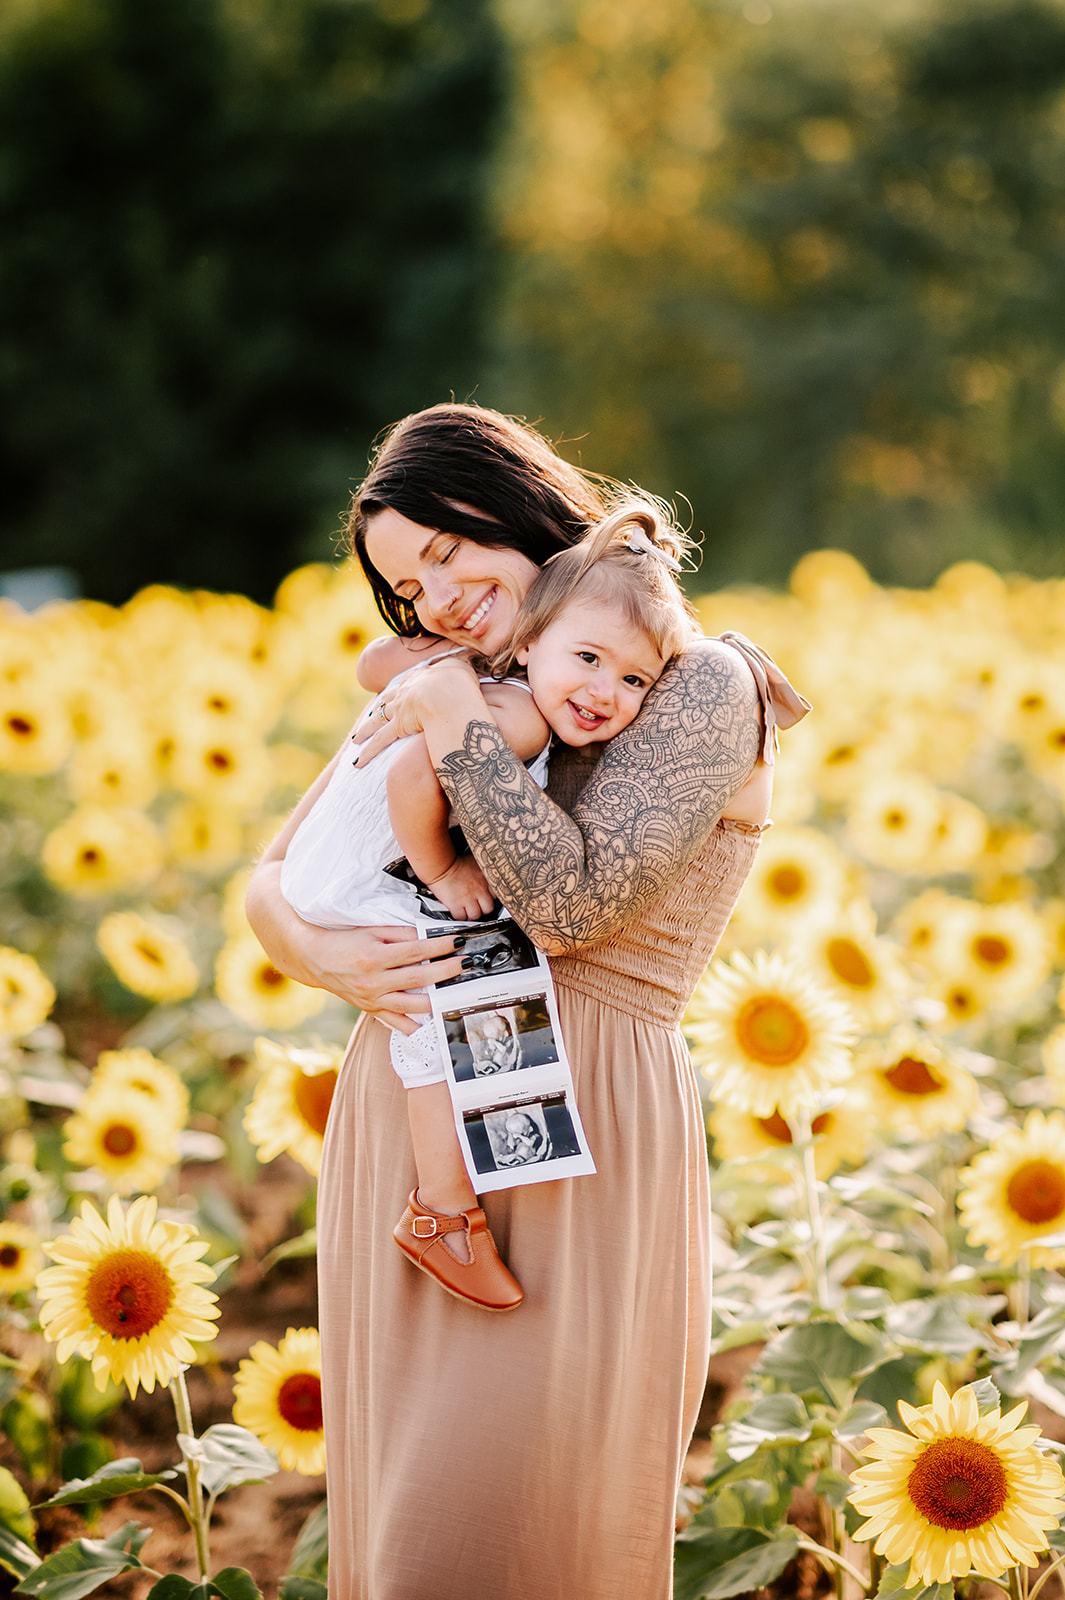 A pregnant mom holding her sonograms hugs her smiling toddler daughter while standing in a field of sunflowers at Dogwood Farms